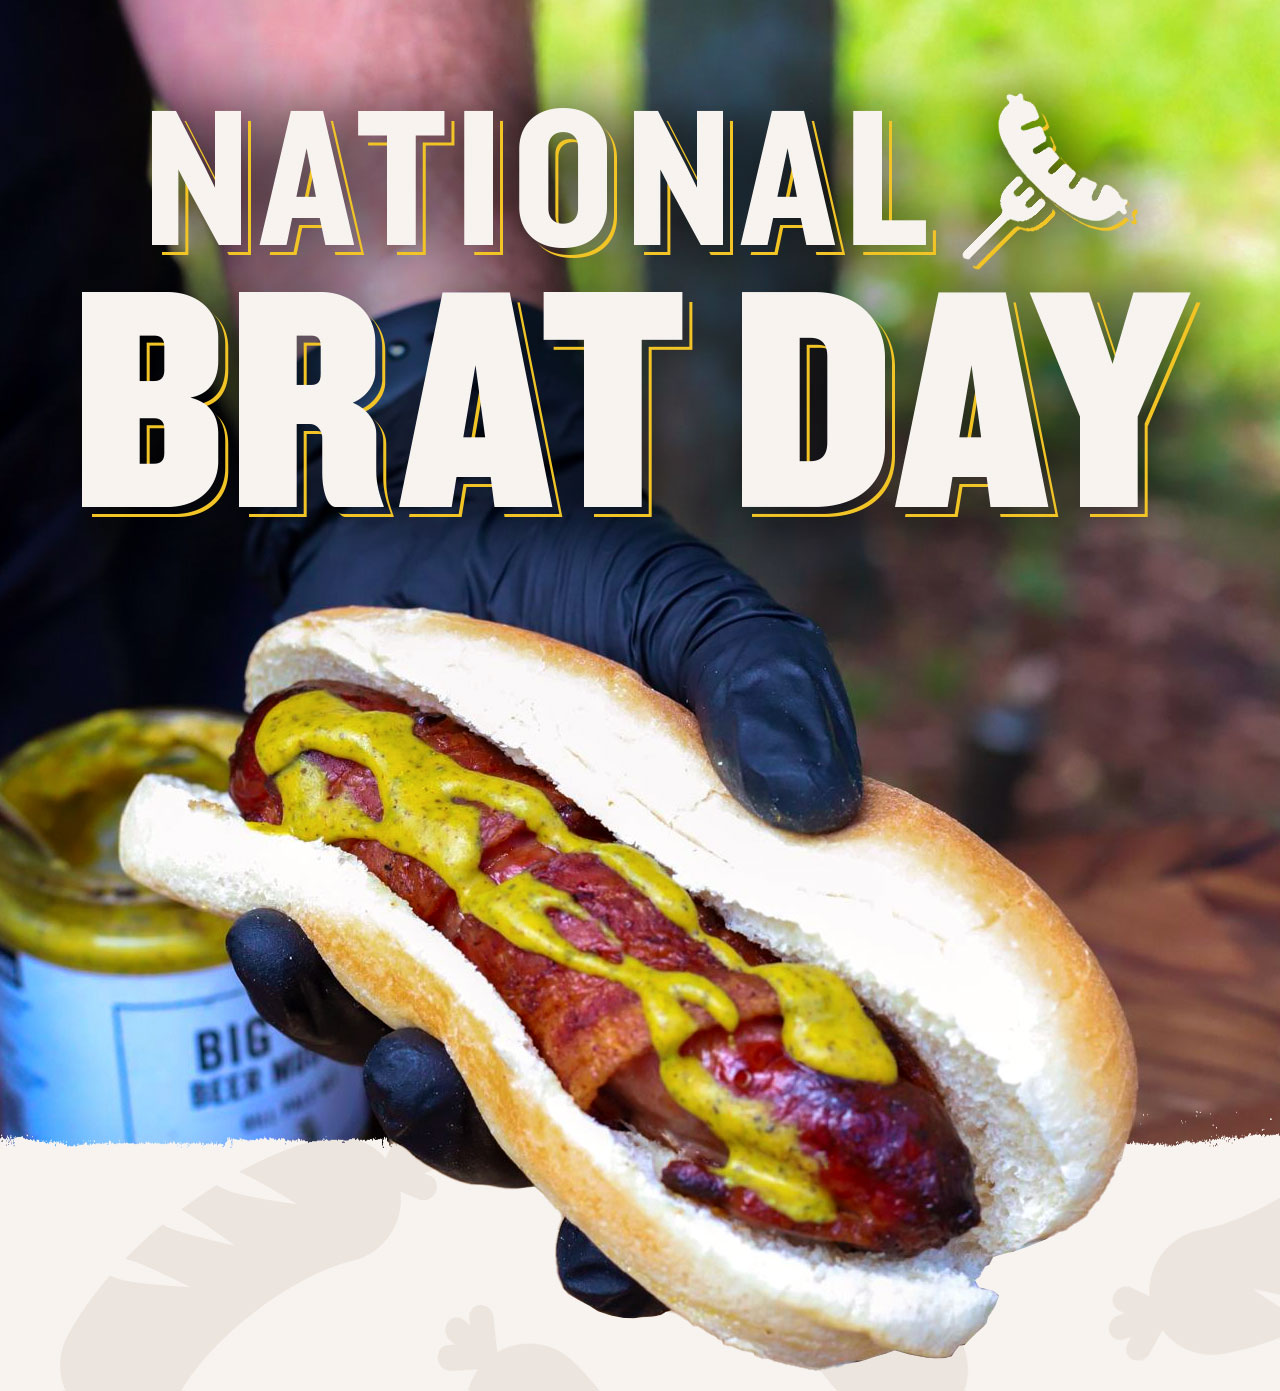 Brats Up! It's National Brat Day PS Seasoning And Spices